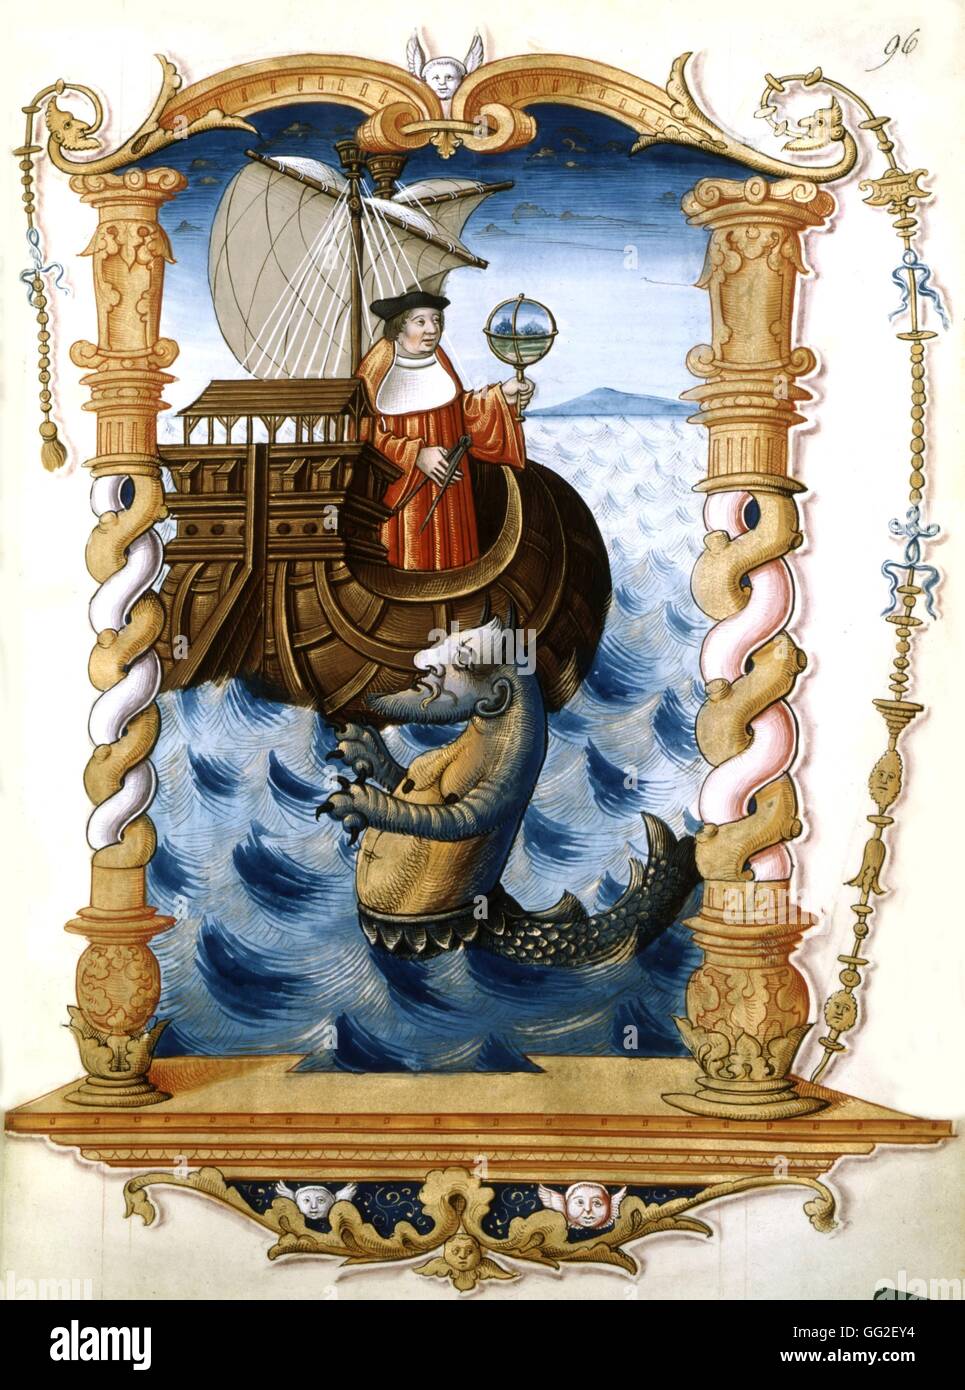 Royal songs on the crowned Conception of the Puy de Rouen (1519-1528). On a boat, an astronomer holding a compass and a globe in his hands. A sea monster accompanies the boat. 16th century France Stock Photo